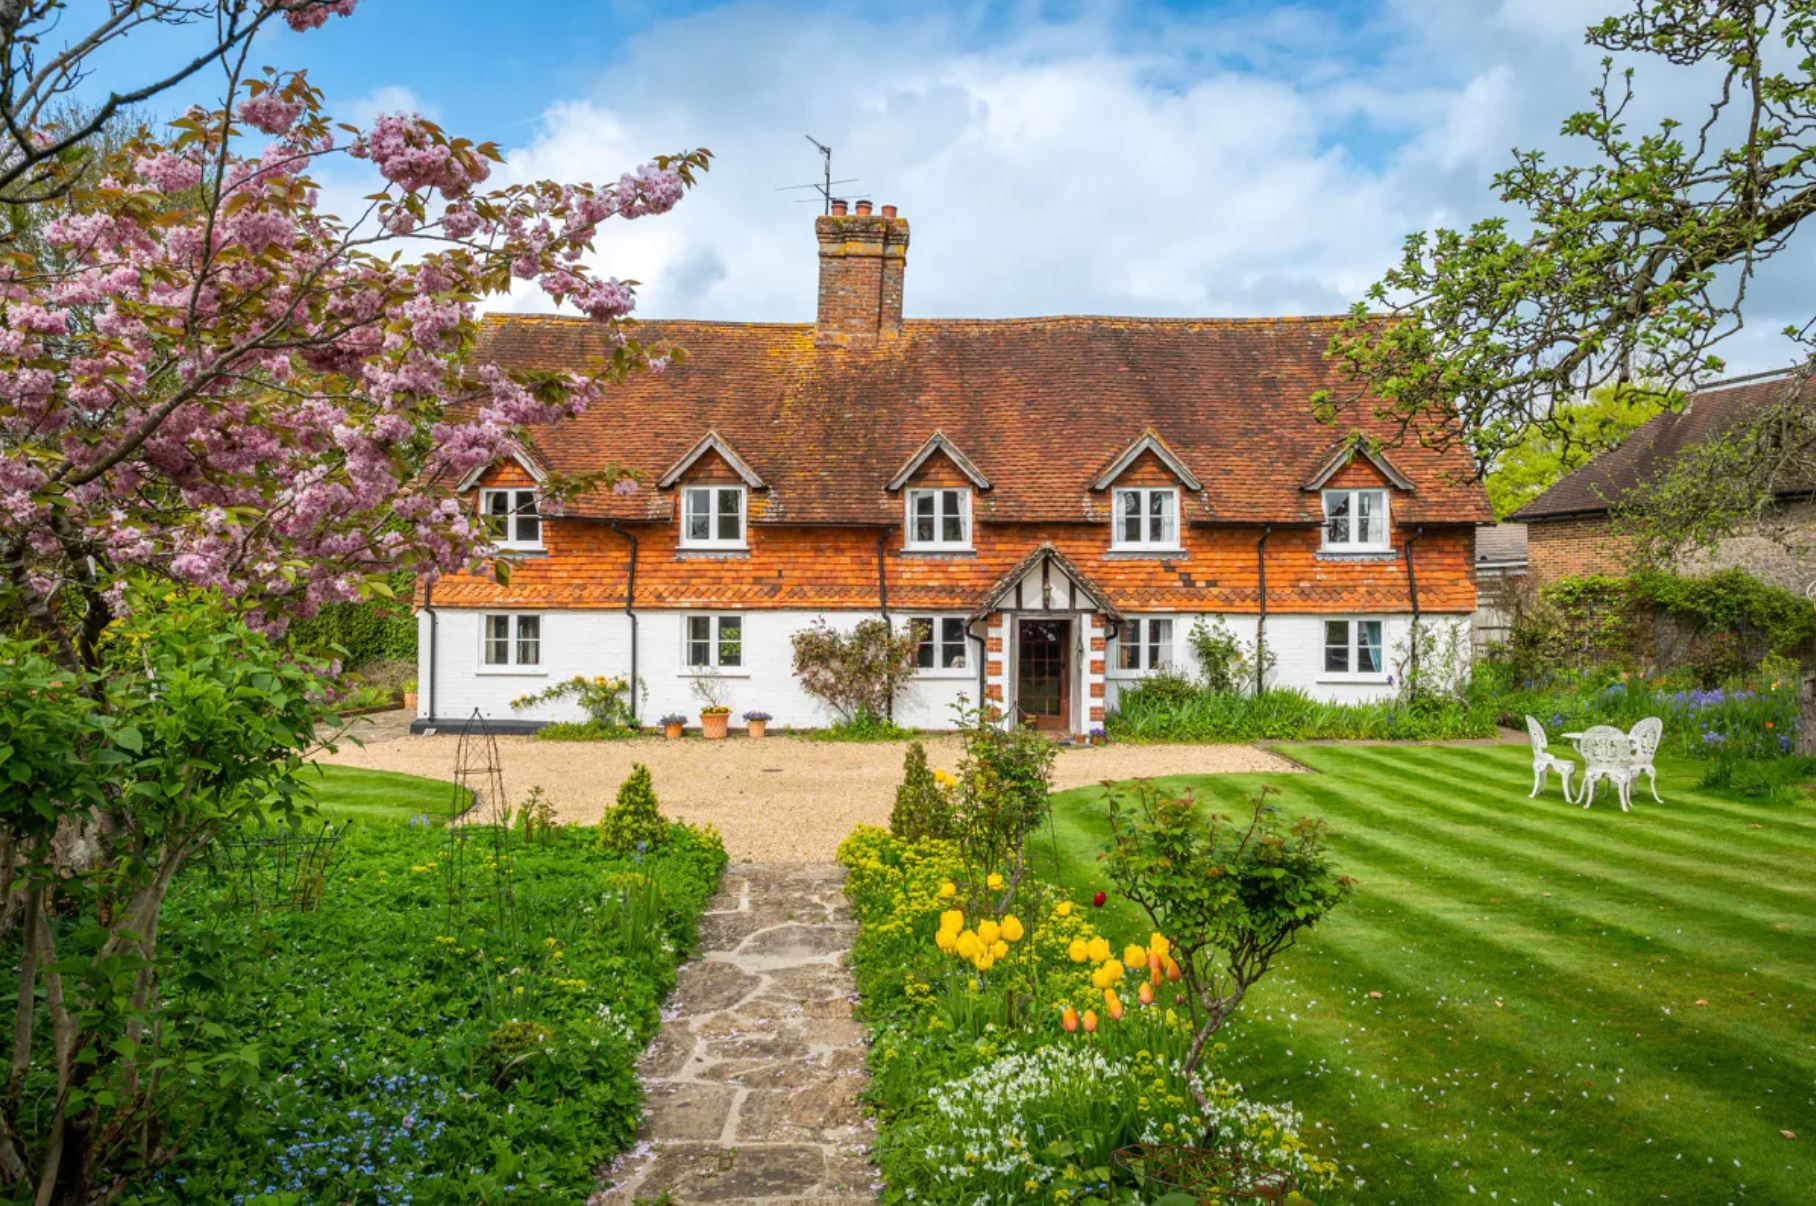 Five charming properties complete with English country gardens